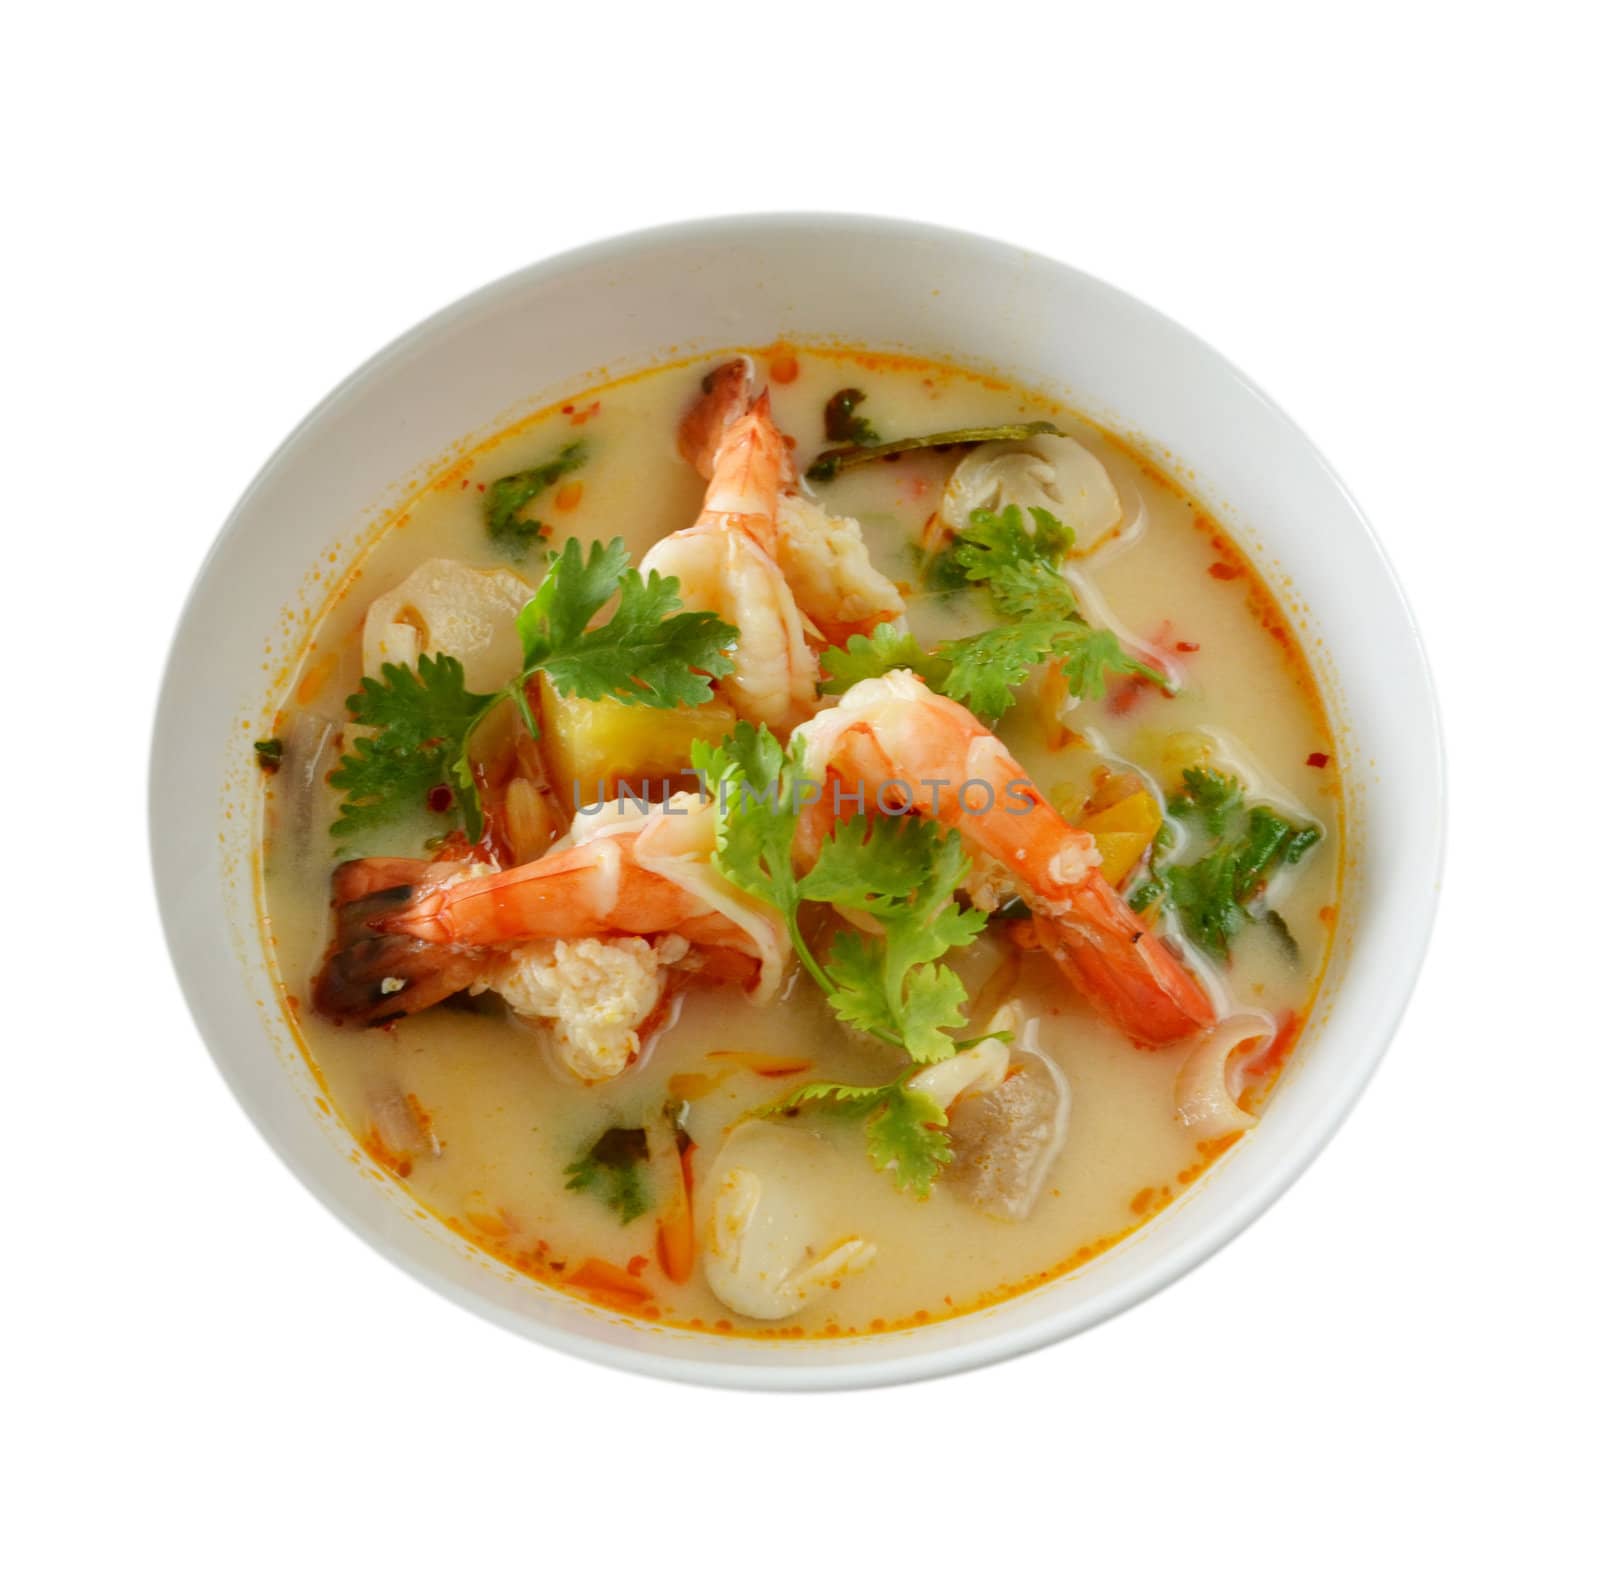  Tom Yum Goong is spicy soup with shrimp ,favorite Thai food